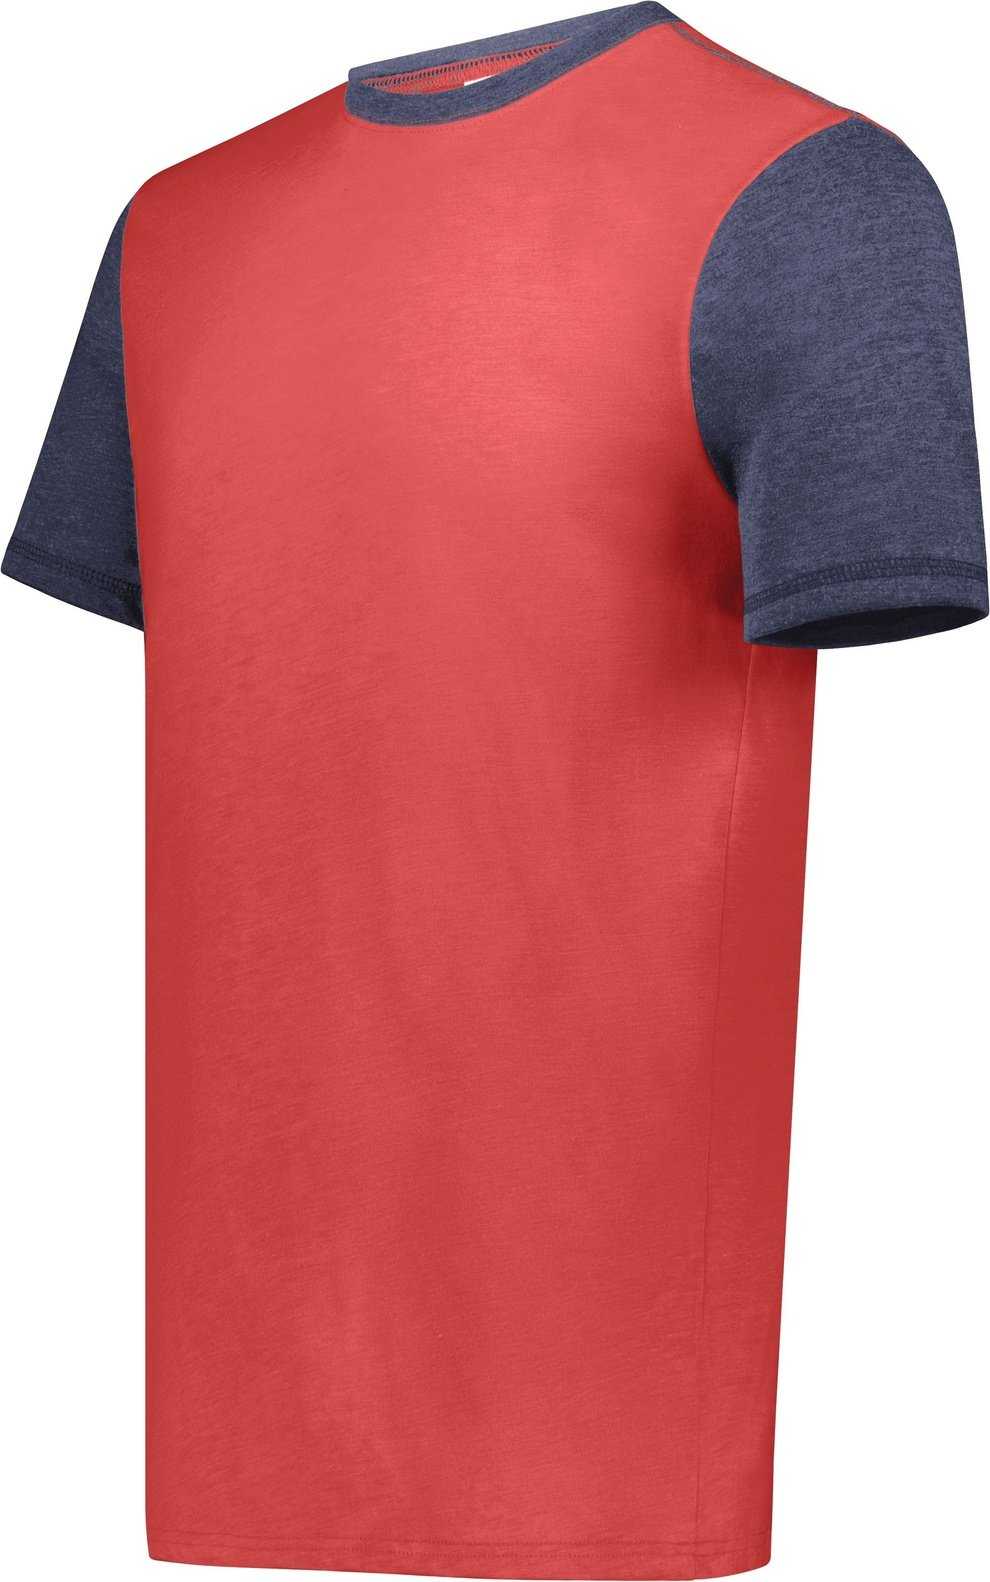 Augusta 6877 Youth Gameday Vintage Ringer Tee - Scarlet Heather Navy Heather - HIT a Double